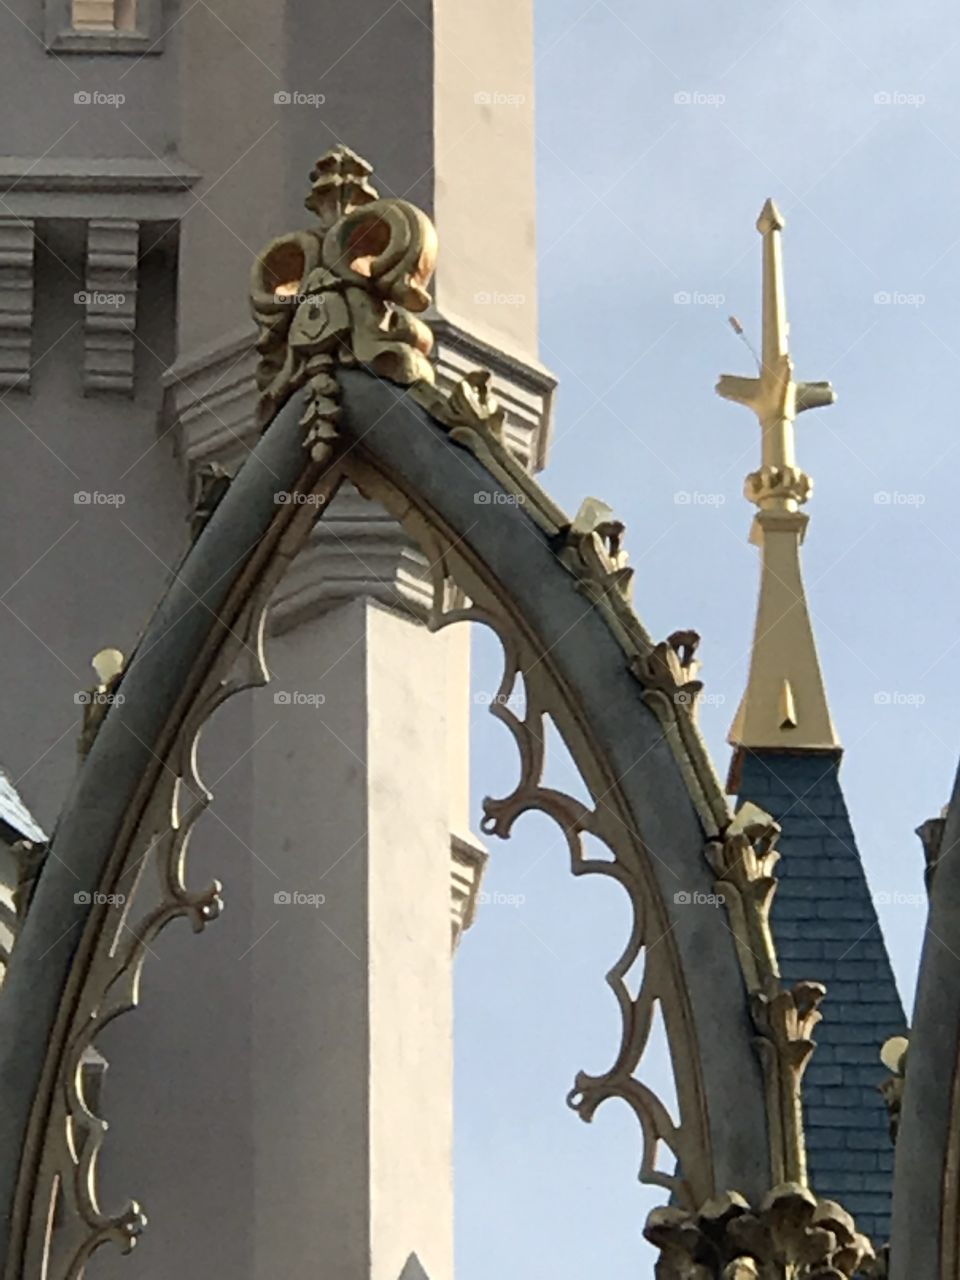 #day72 Everyday Disney World in Orlando Florida.  I have been lost on Disney Properties consecutively since 4/3/19!  You can find it on https://www.facebook.com/selsa.susanna or on IG SelsaCamacho YT SelsaSusanna • Magic Kingdom 6/13/19 Thursday 